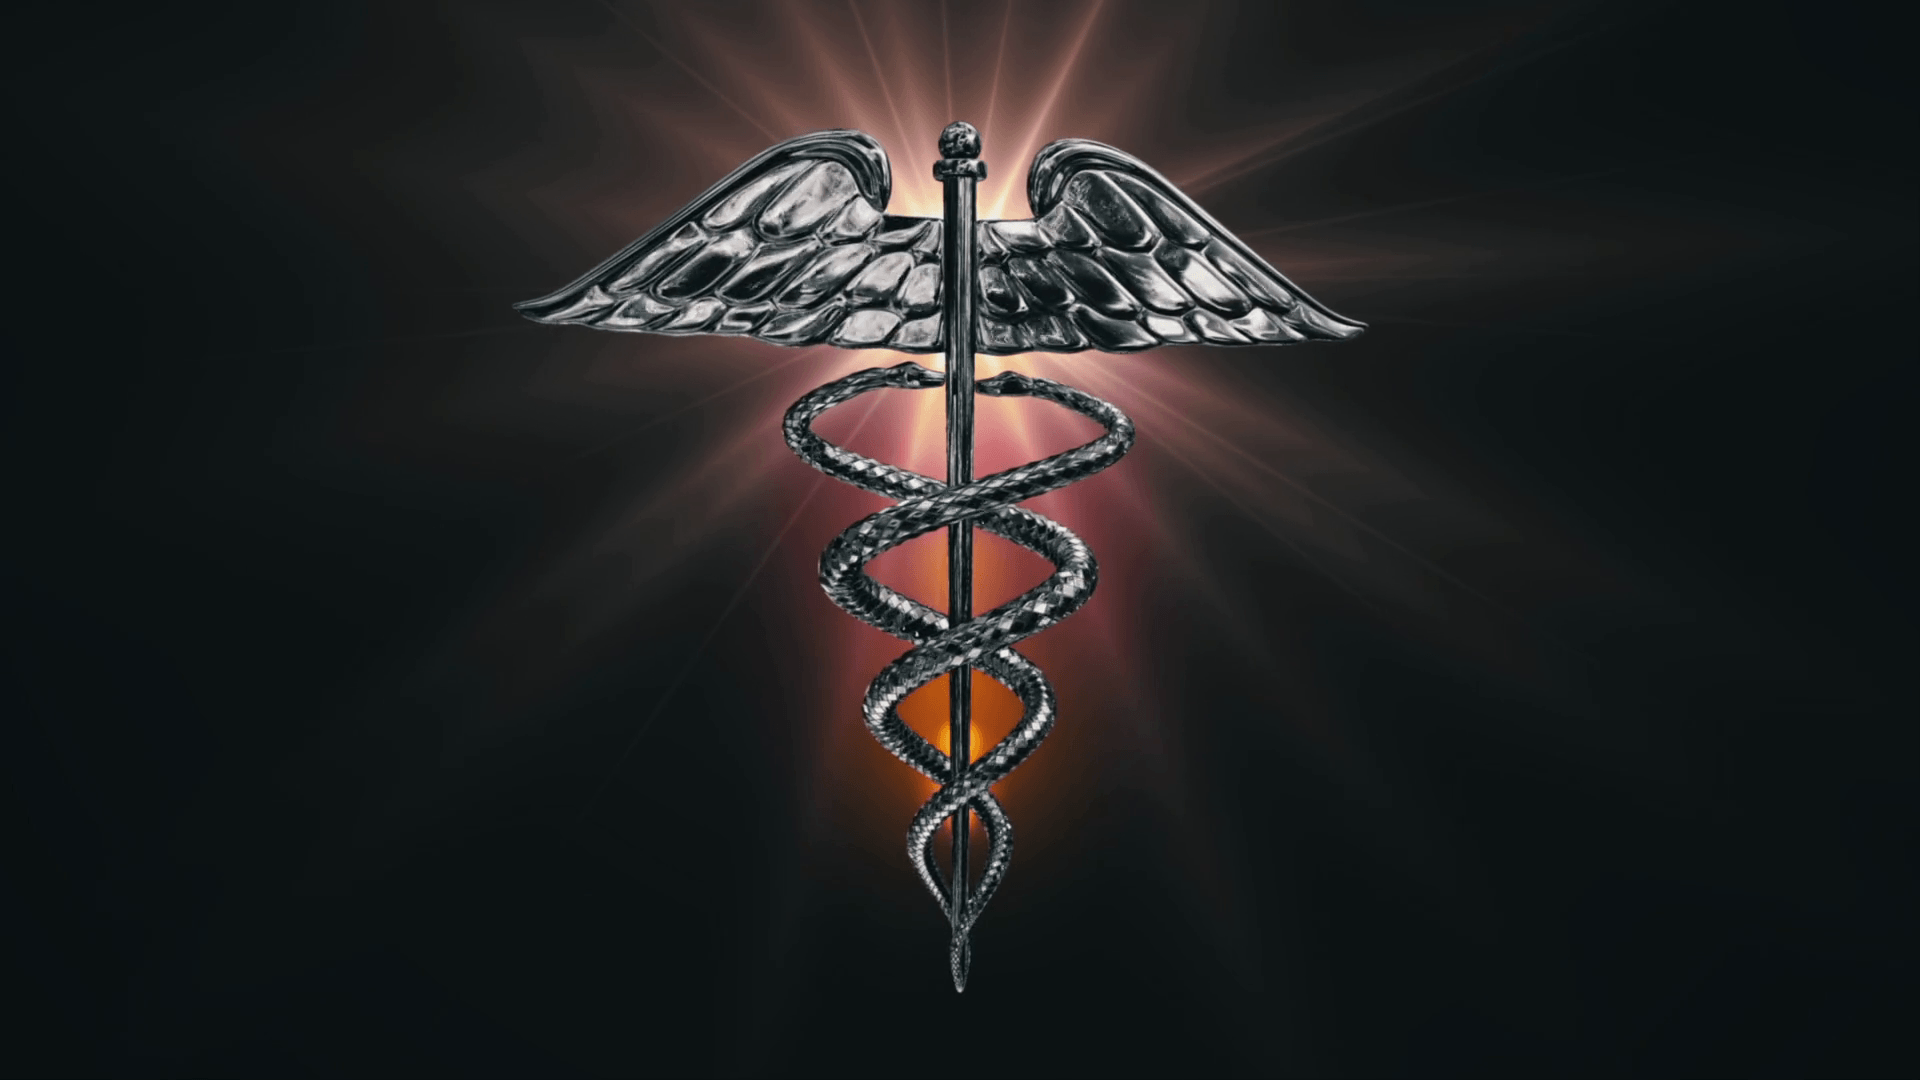 Illustration about Universal medical symbol against a brick wall  Illustration of pharmacy background h  Medical symbols Medical  wallpaper Black paper drawing